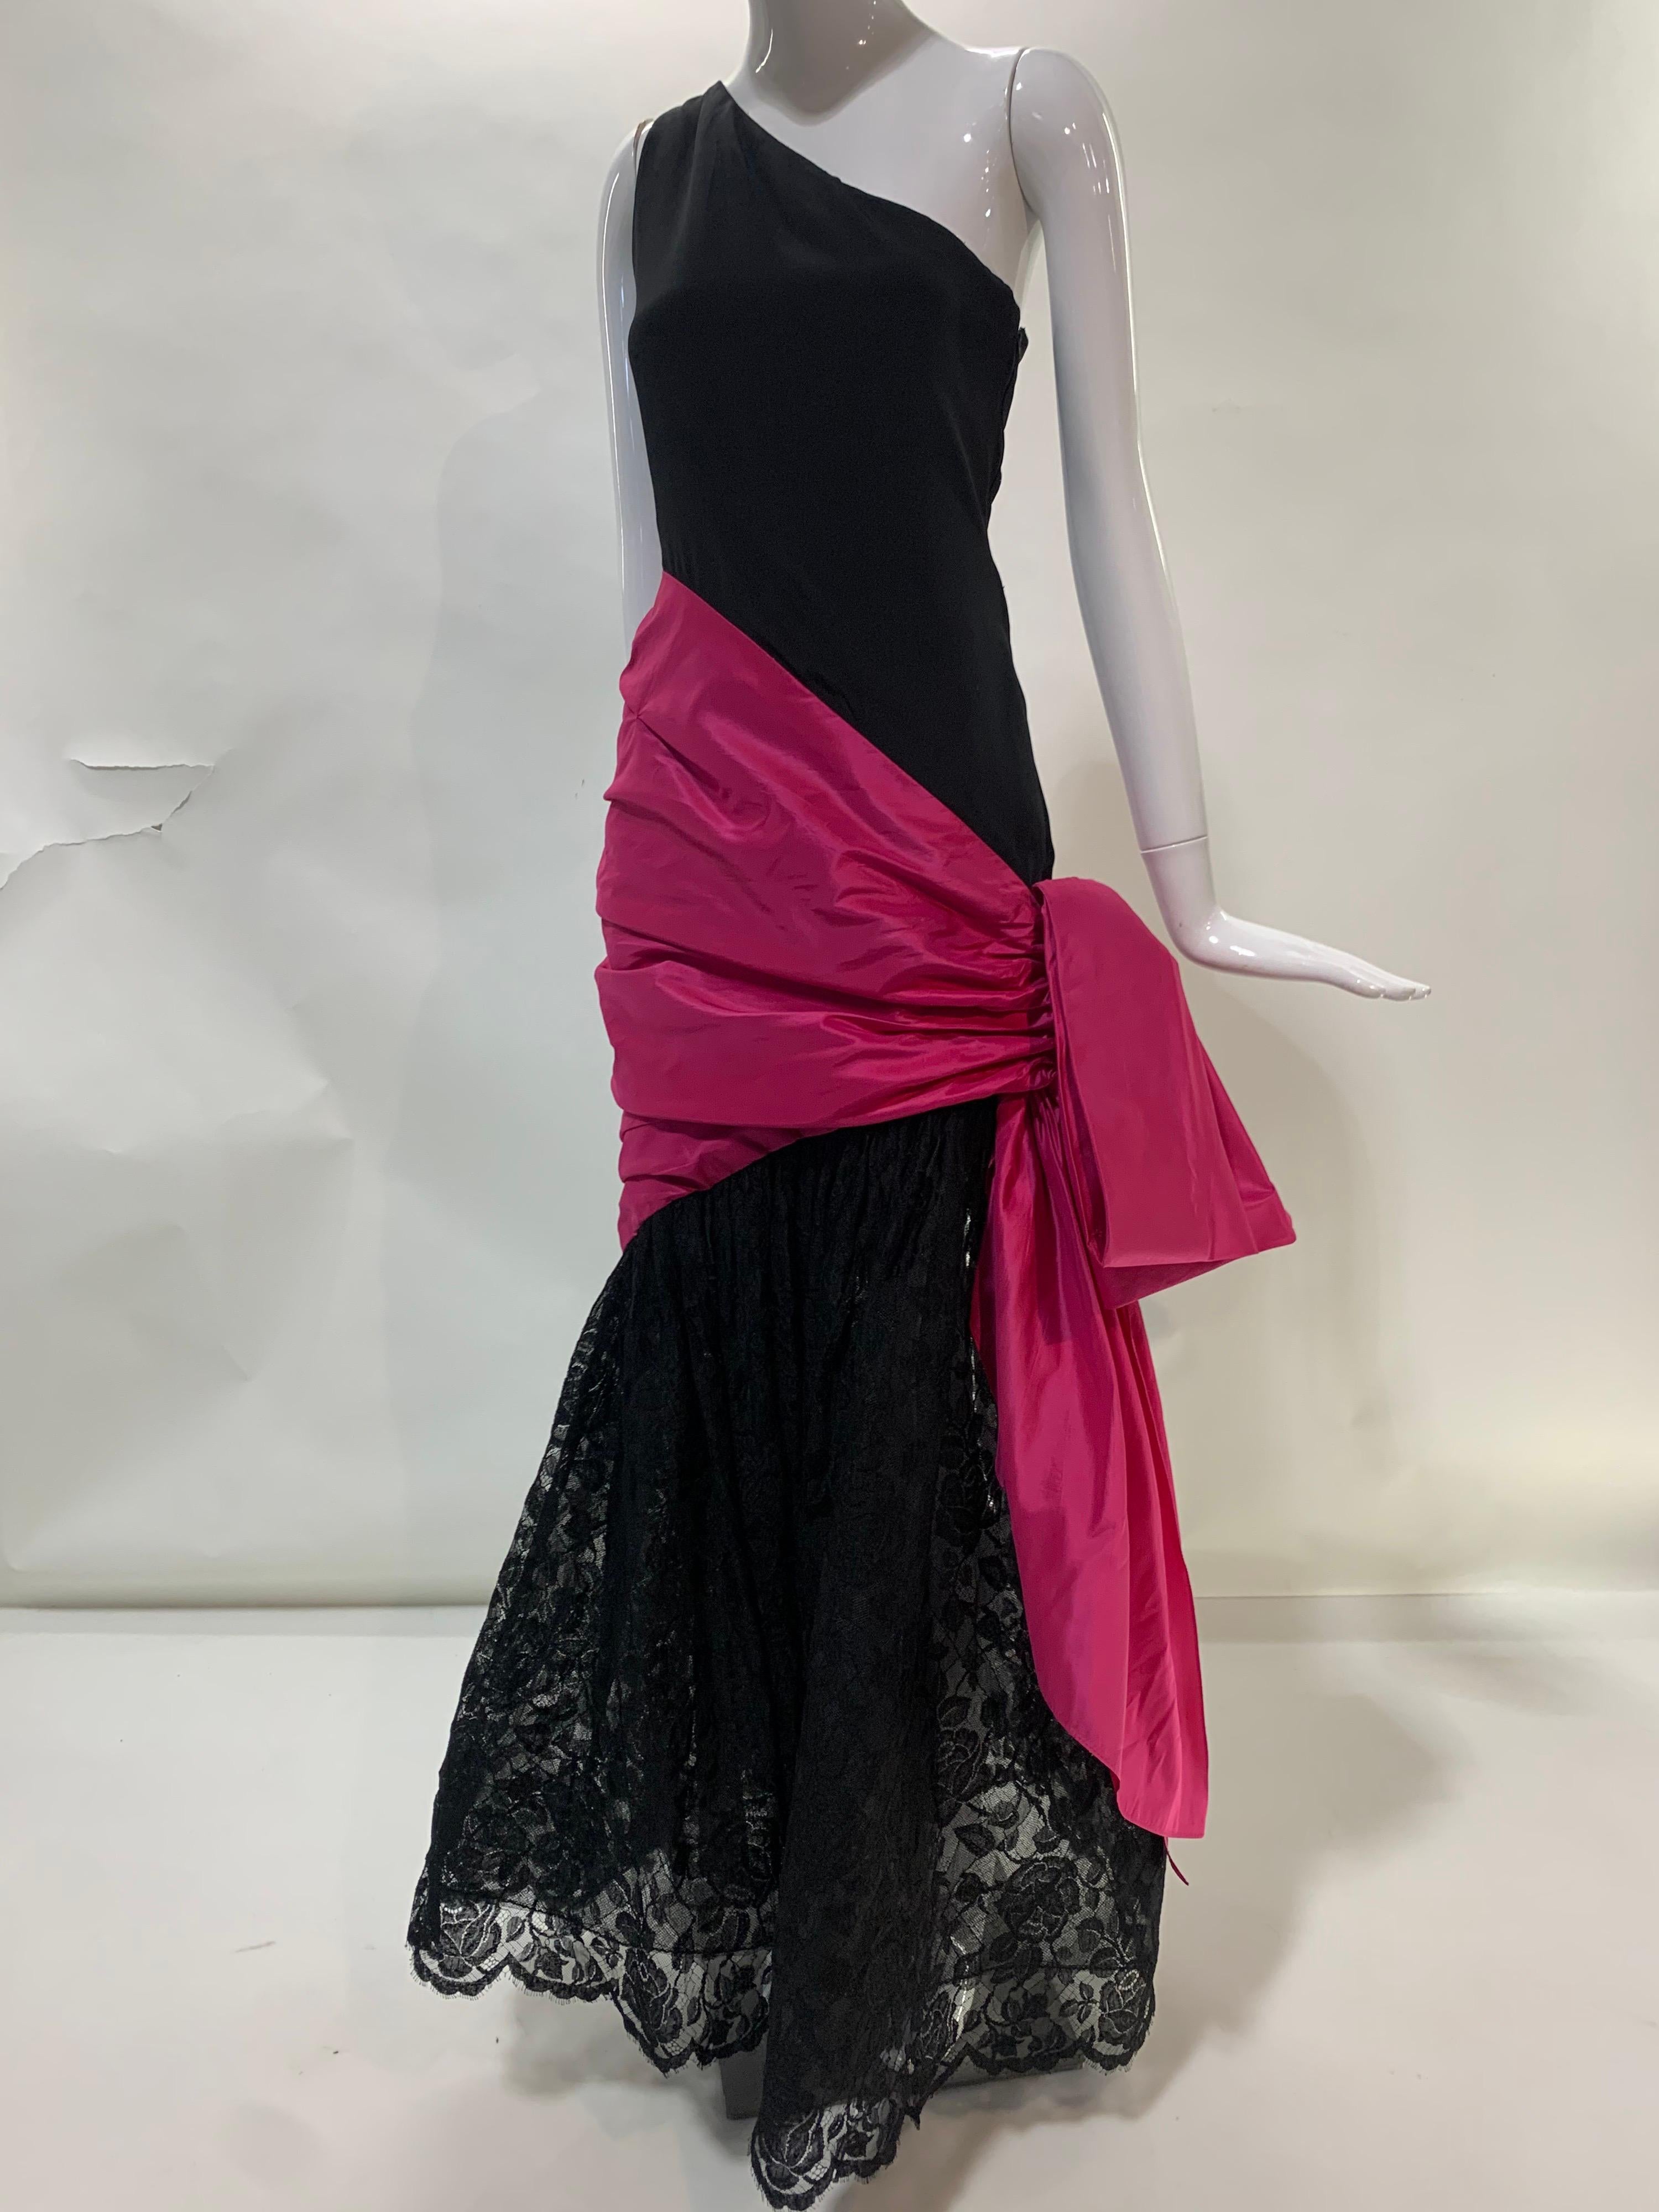 1980 Bill Blass Black Silk Crepe One-Shoulder Gown w/ Lace Skirt and Fuchsia Bow For Sale 12